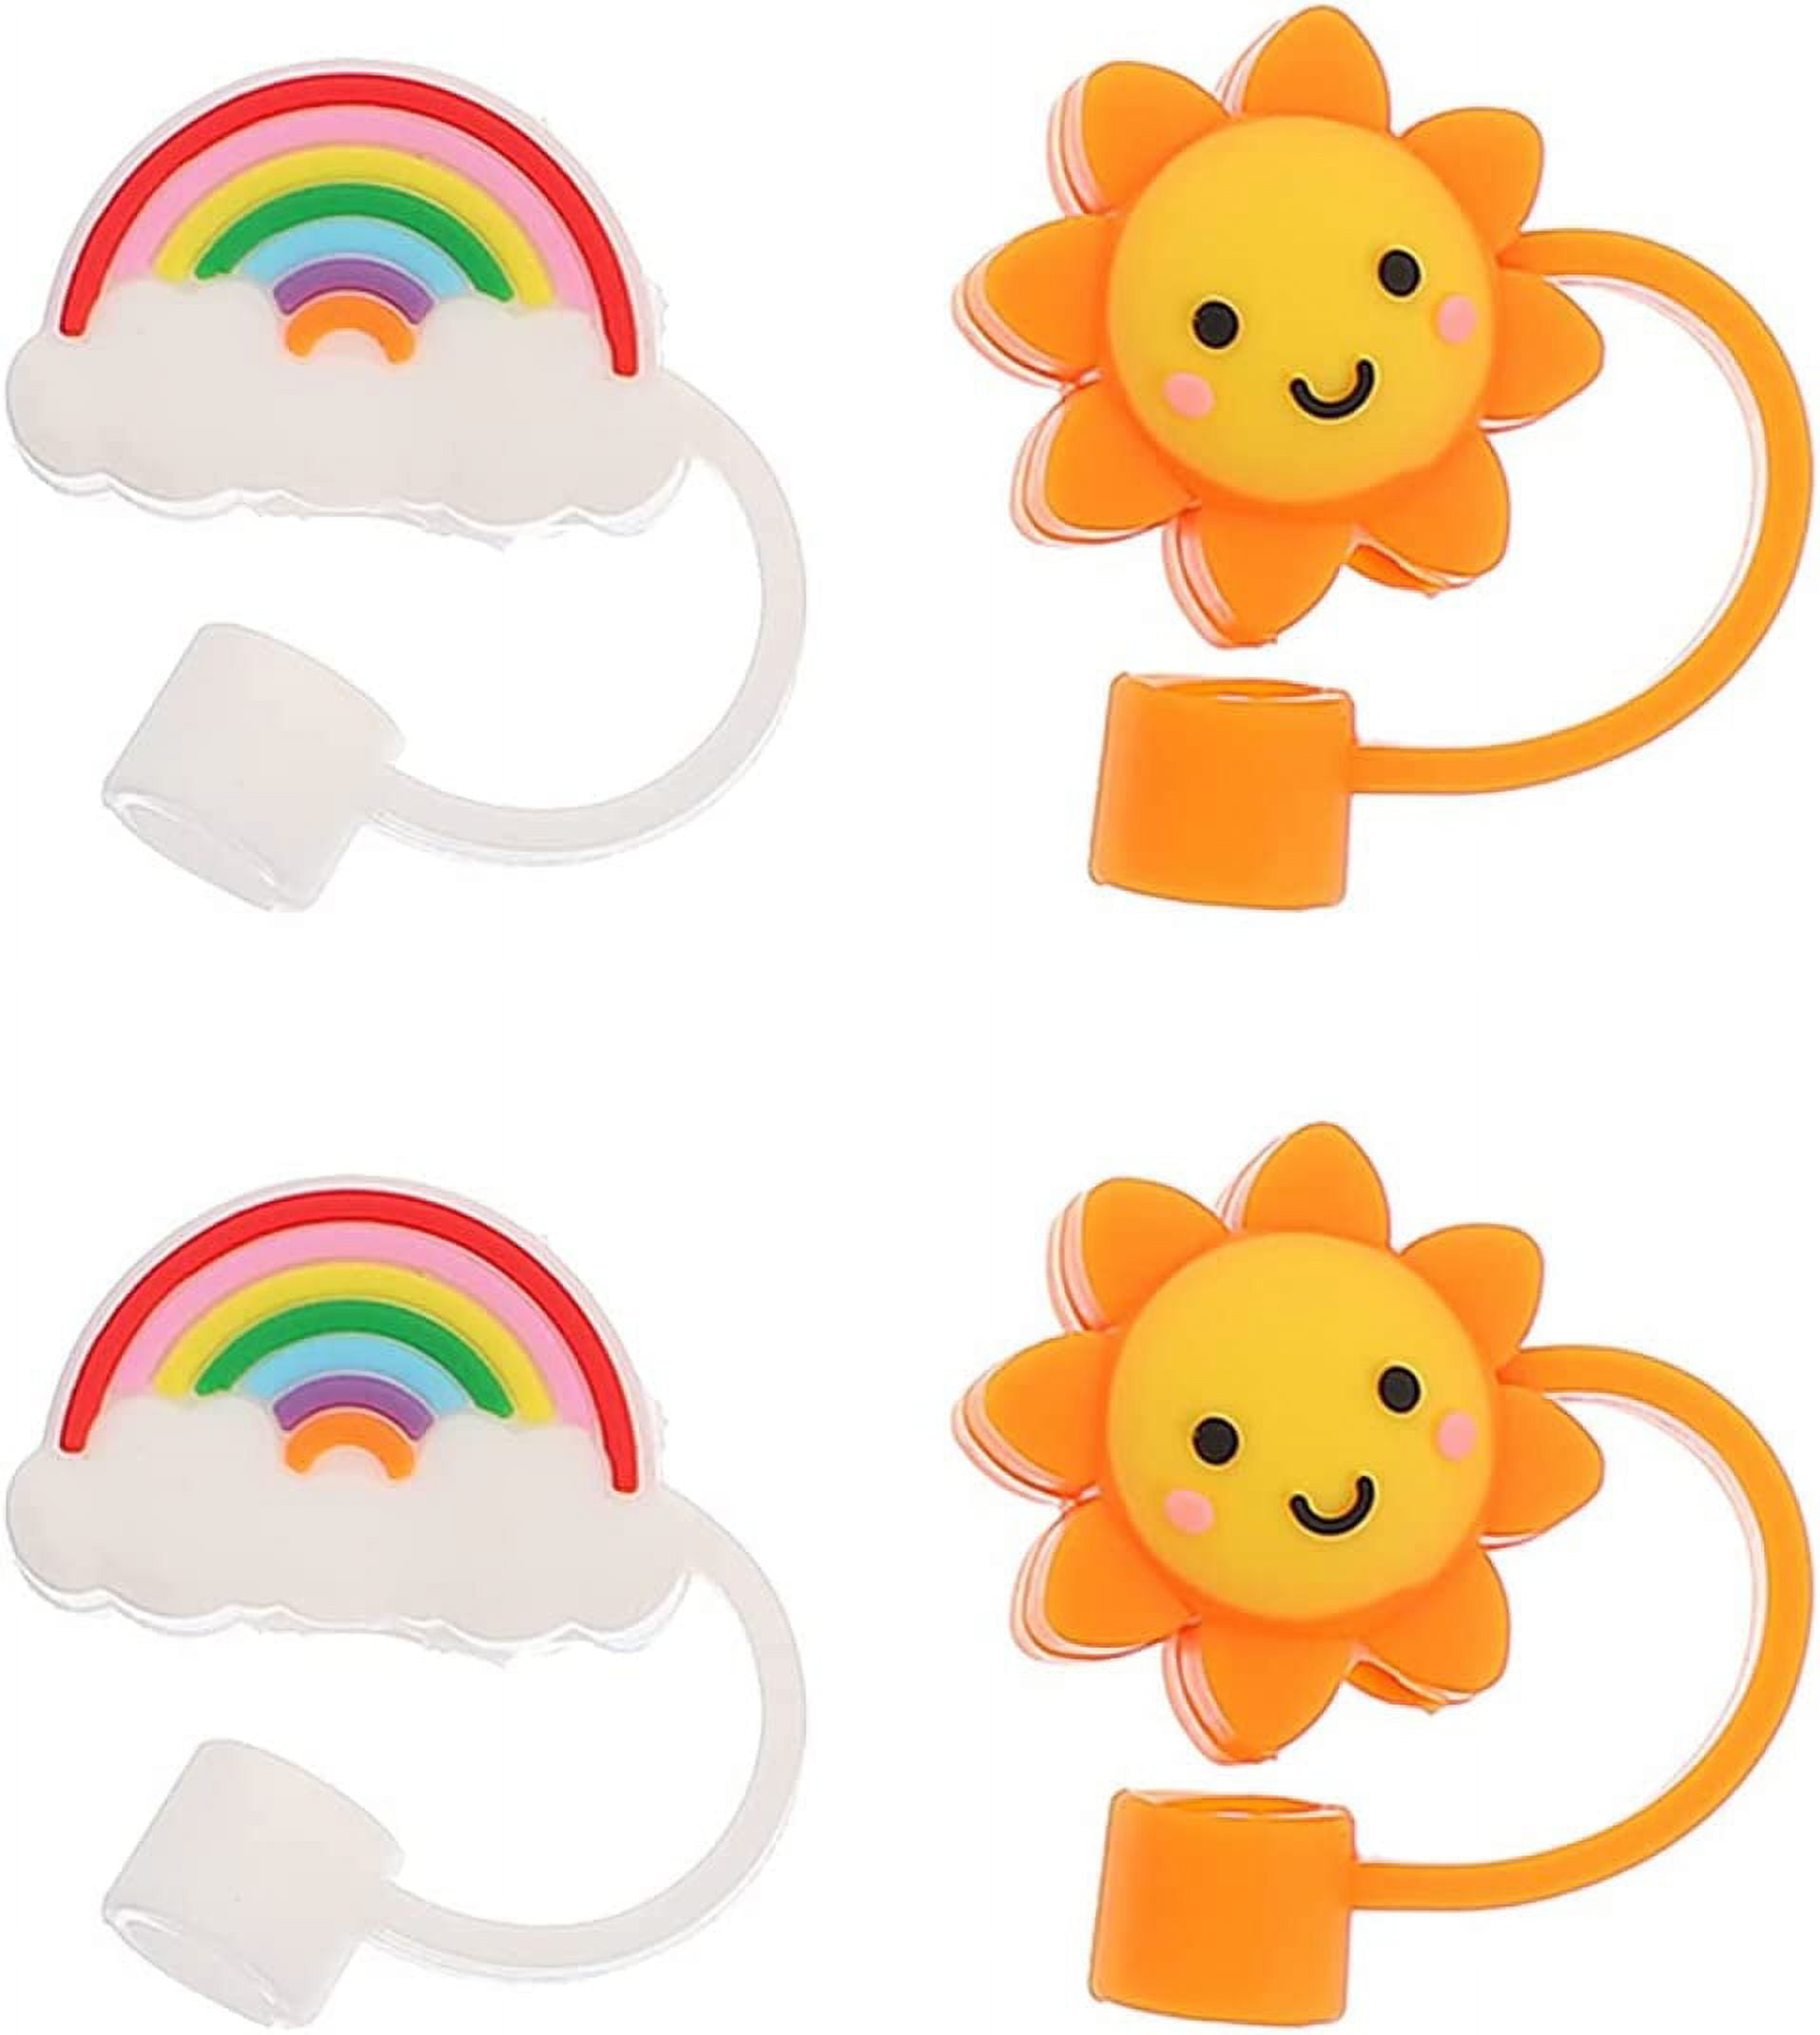 4Pcs Silicone Straw Covers Cap, Straw Tips Cover Straw Covers Cap for  Reusable Straws Cloud Shape Straw Protector. The Clouds, Rainbow,  Strawberry, Duck. : Health & Household 